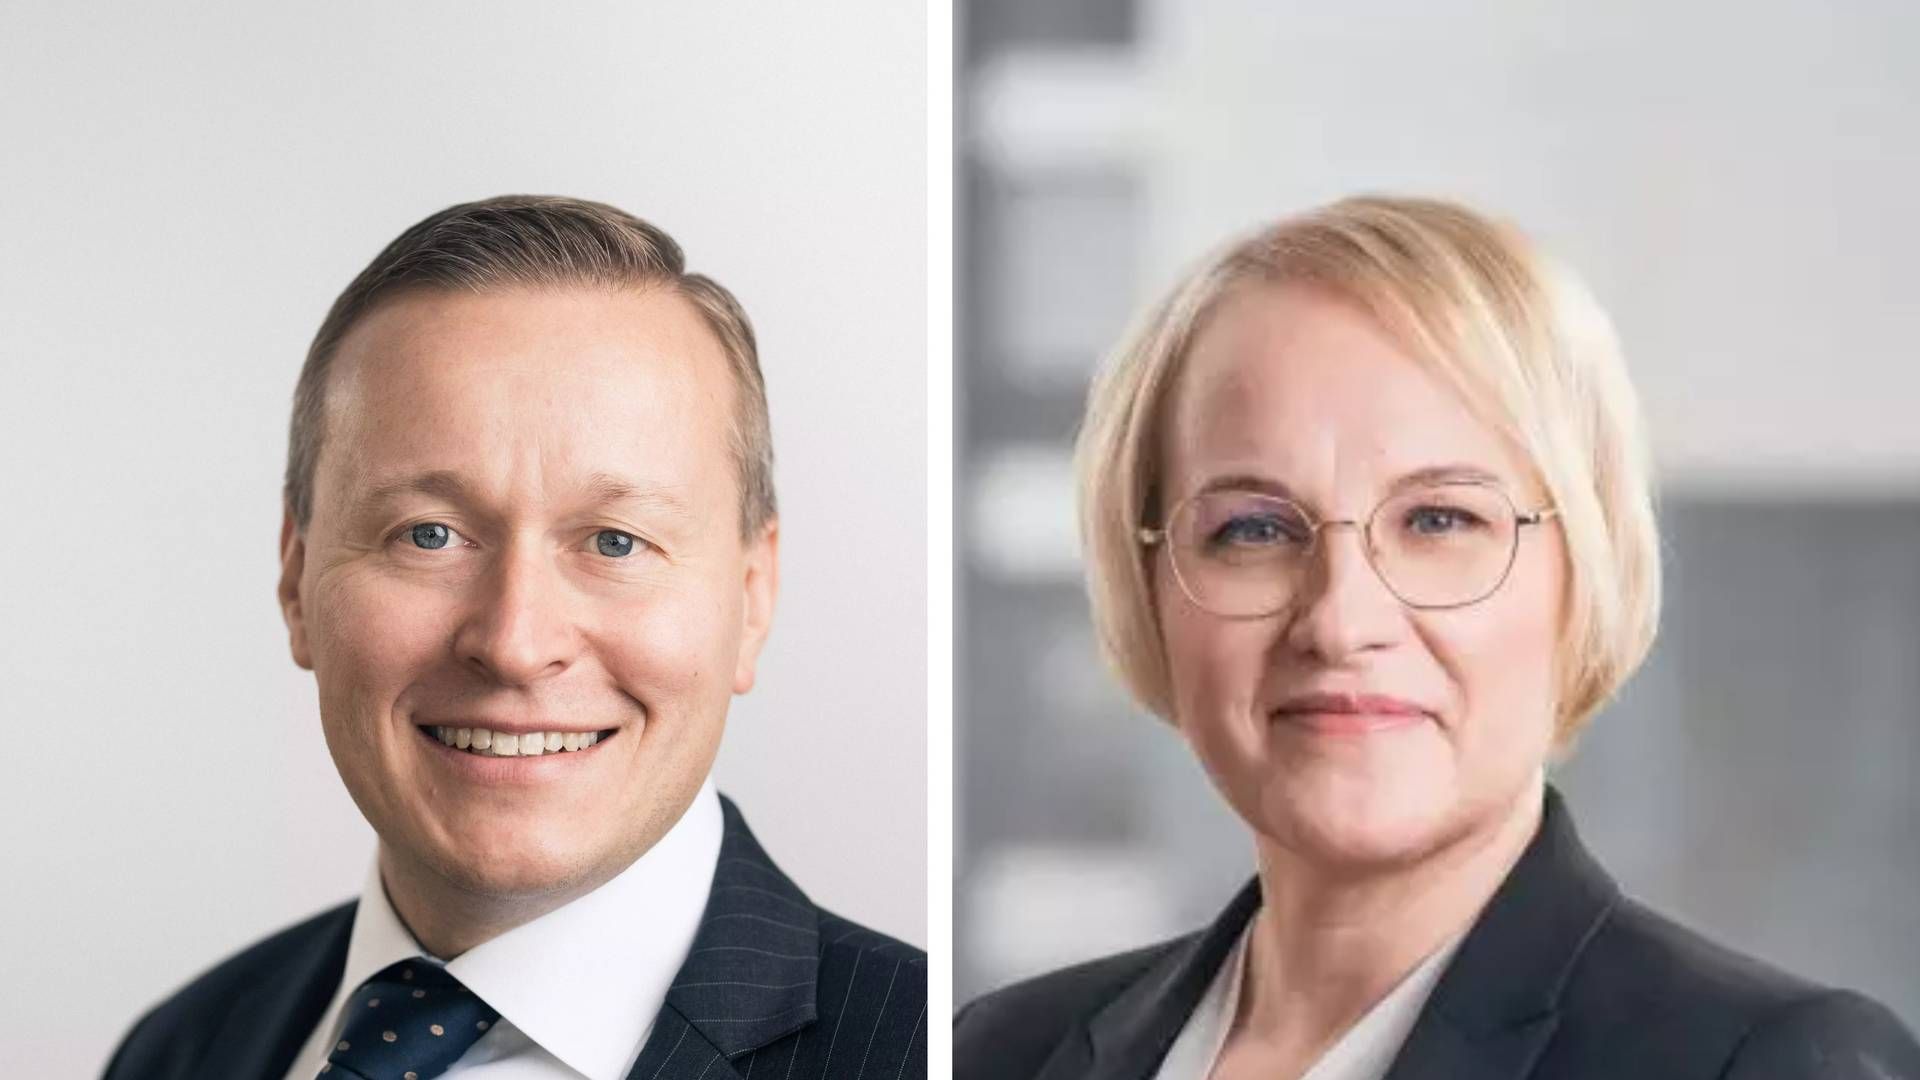 Carl Pettersson is the CEO of Elo, and Jonna Ryhänen is the pension company's recently appointed CIO. | Photo: Elo / Pr